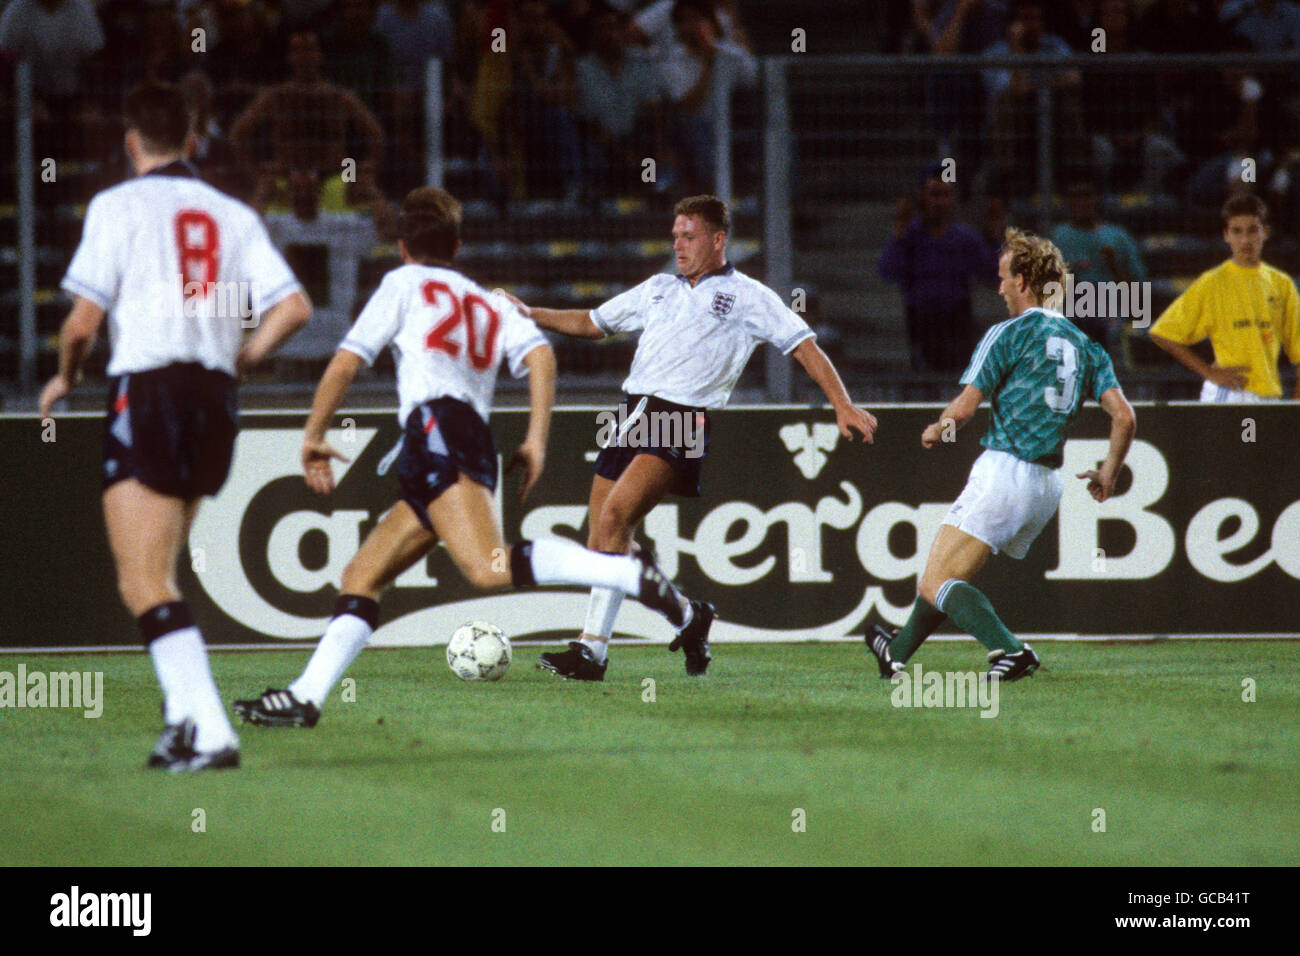 England's Paul Gascoigne (c) under pressure from West Germany's Andreas Brehme (r) Stock Photo